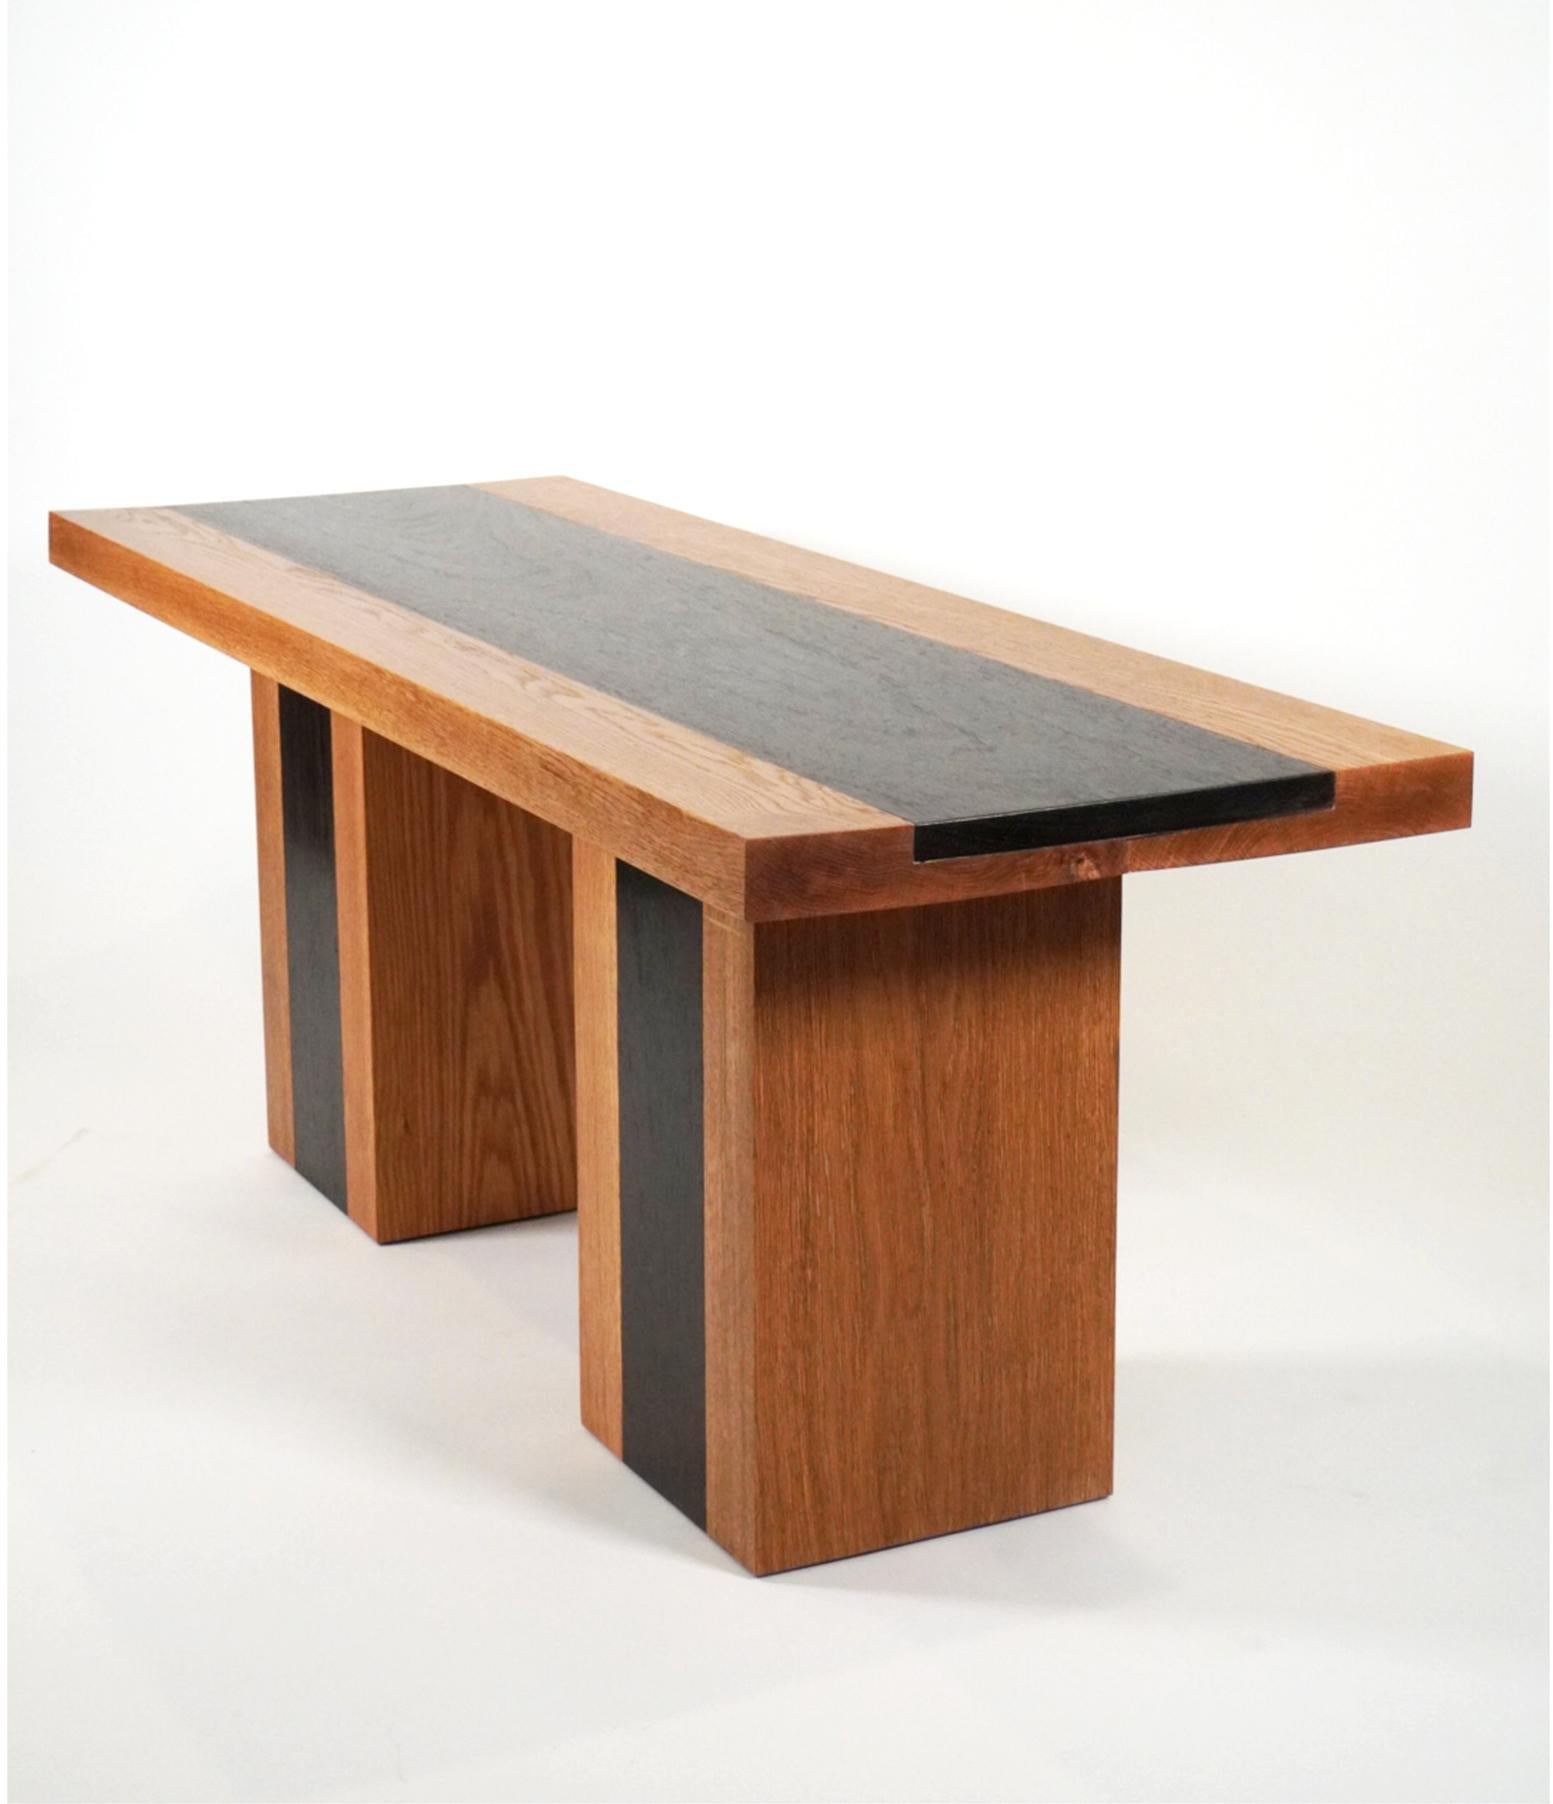 The 21st Century Minimalist Wenge and White Oak Plank Bench is a versatile bench which can function as entry bench, dining bench, or coffee table. The bench is fabricated of rift sawn white oak with Wenge inlays in the top and on the legs of the